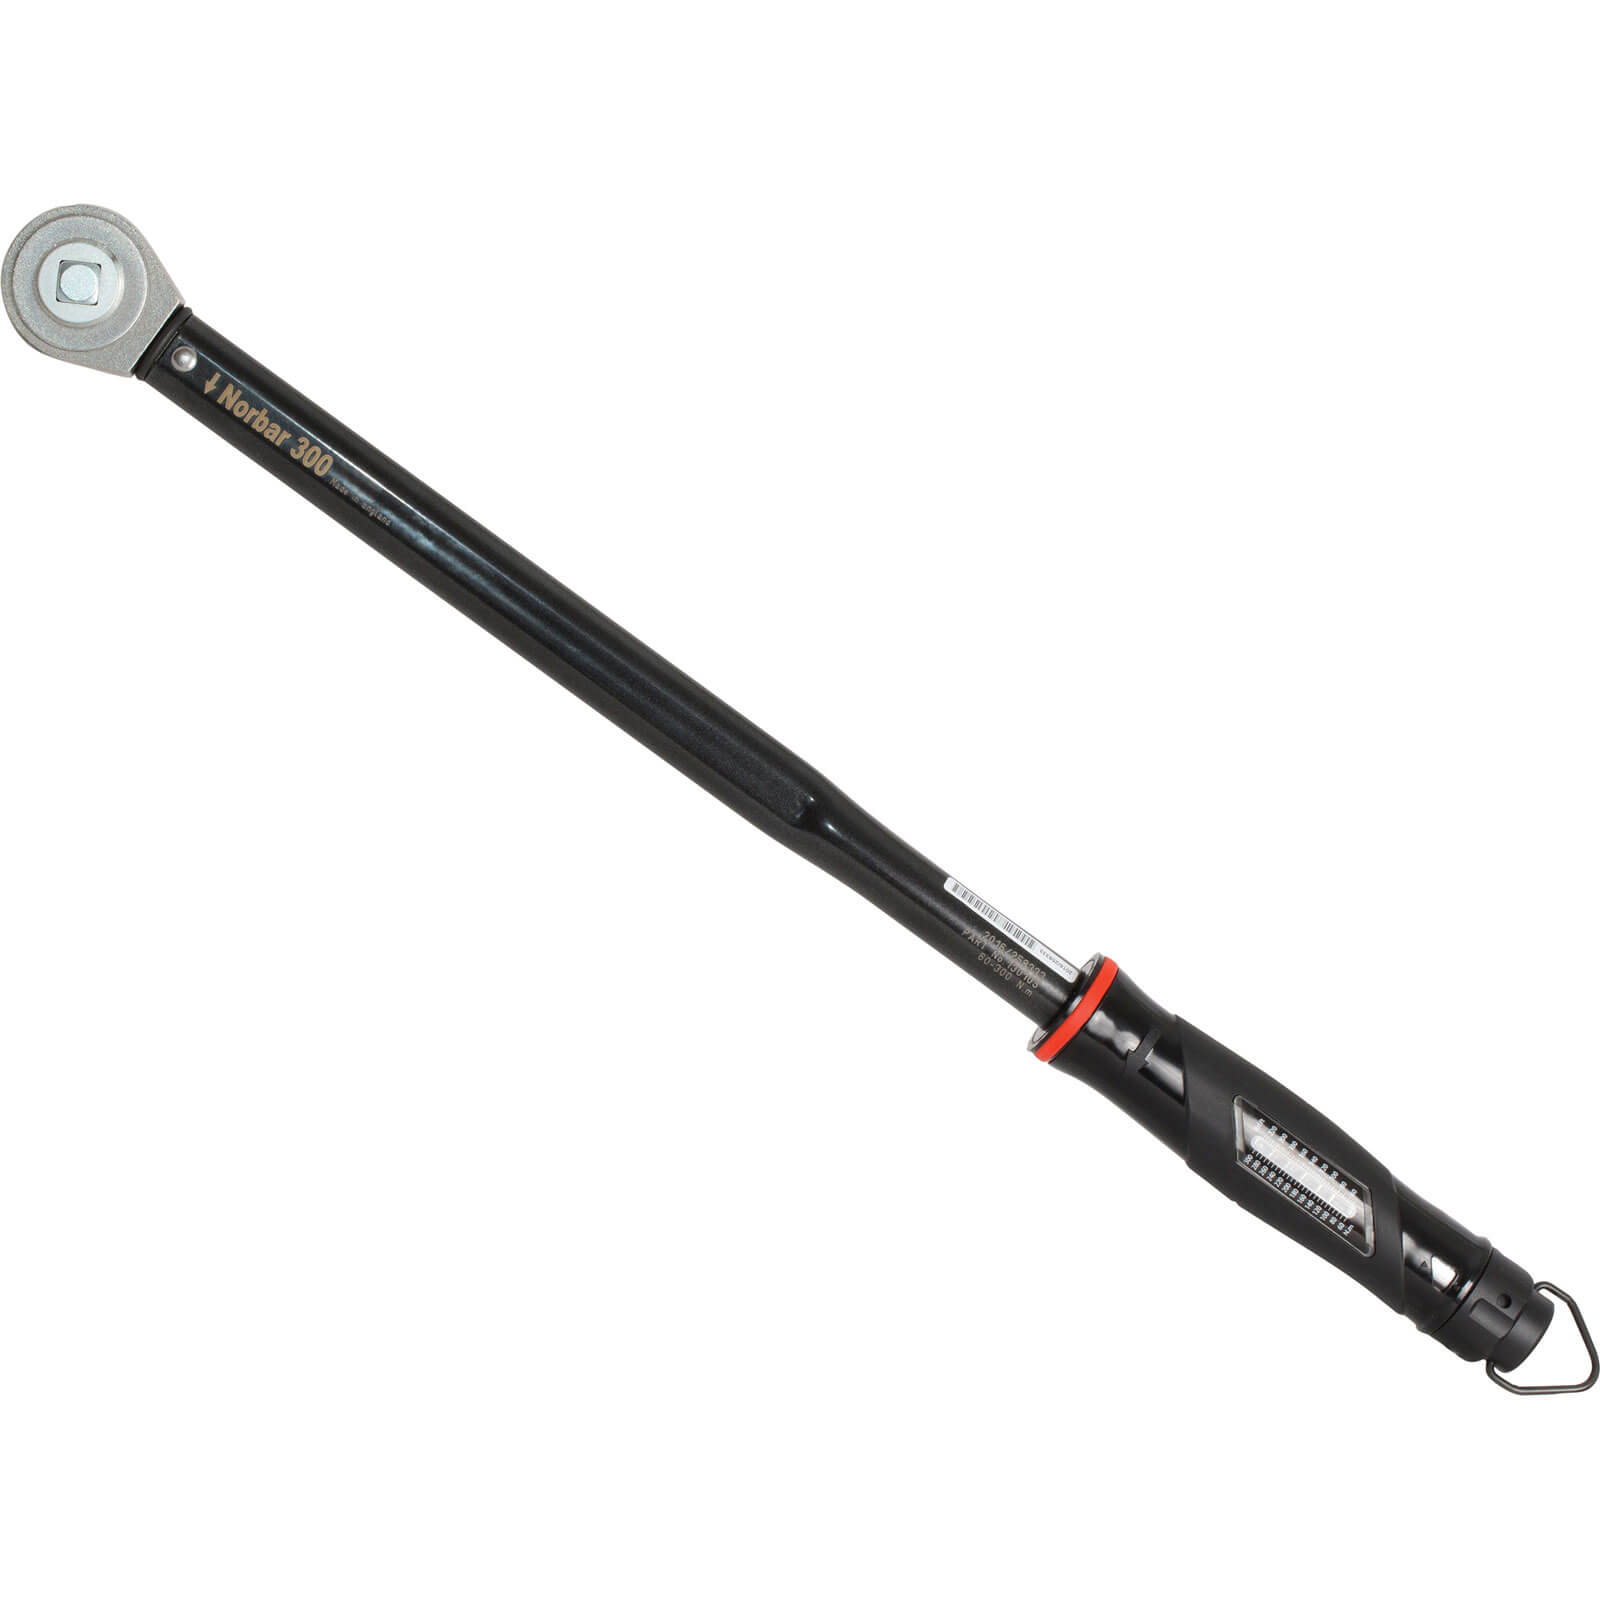 Image of Norbar 1/2" Nortorque Adjustable Dual Scale Ratchet Torque Wrench 1/2" 60Nm - 300Nm